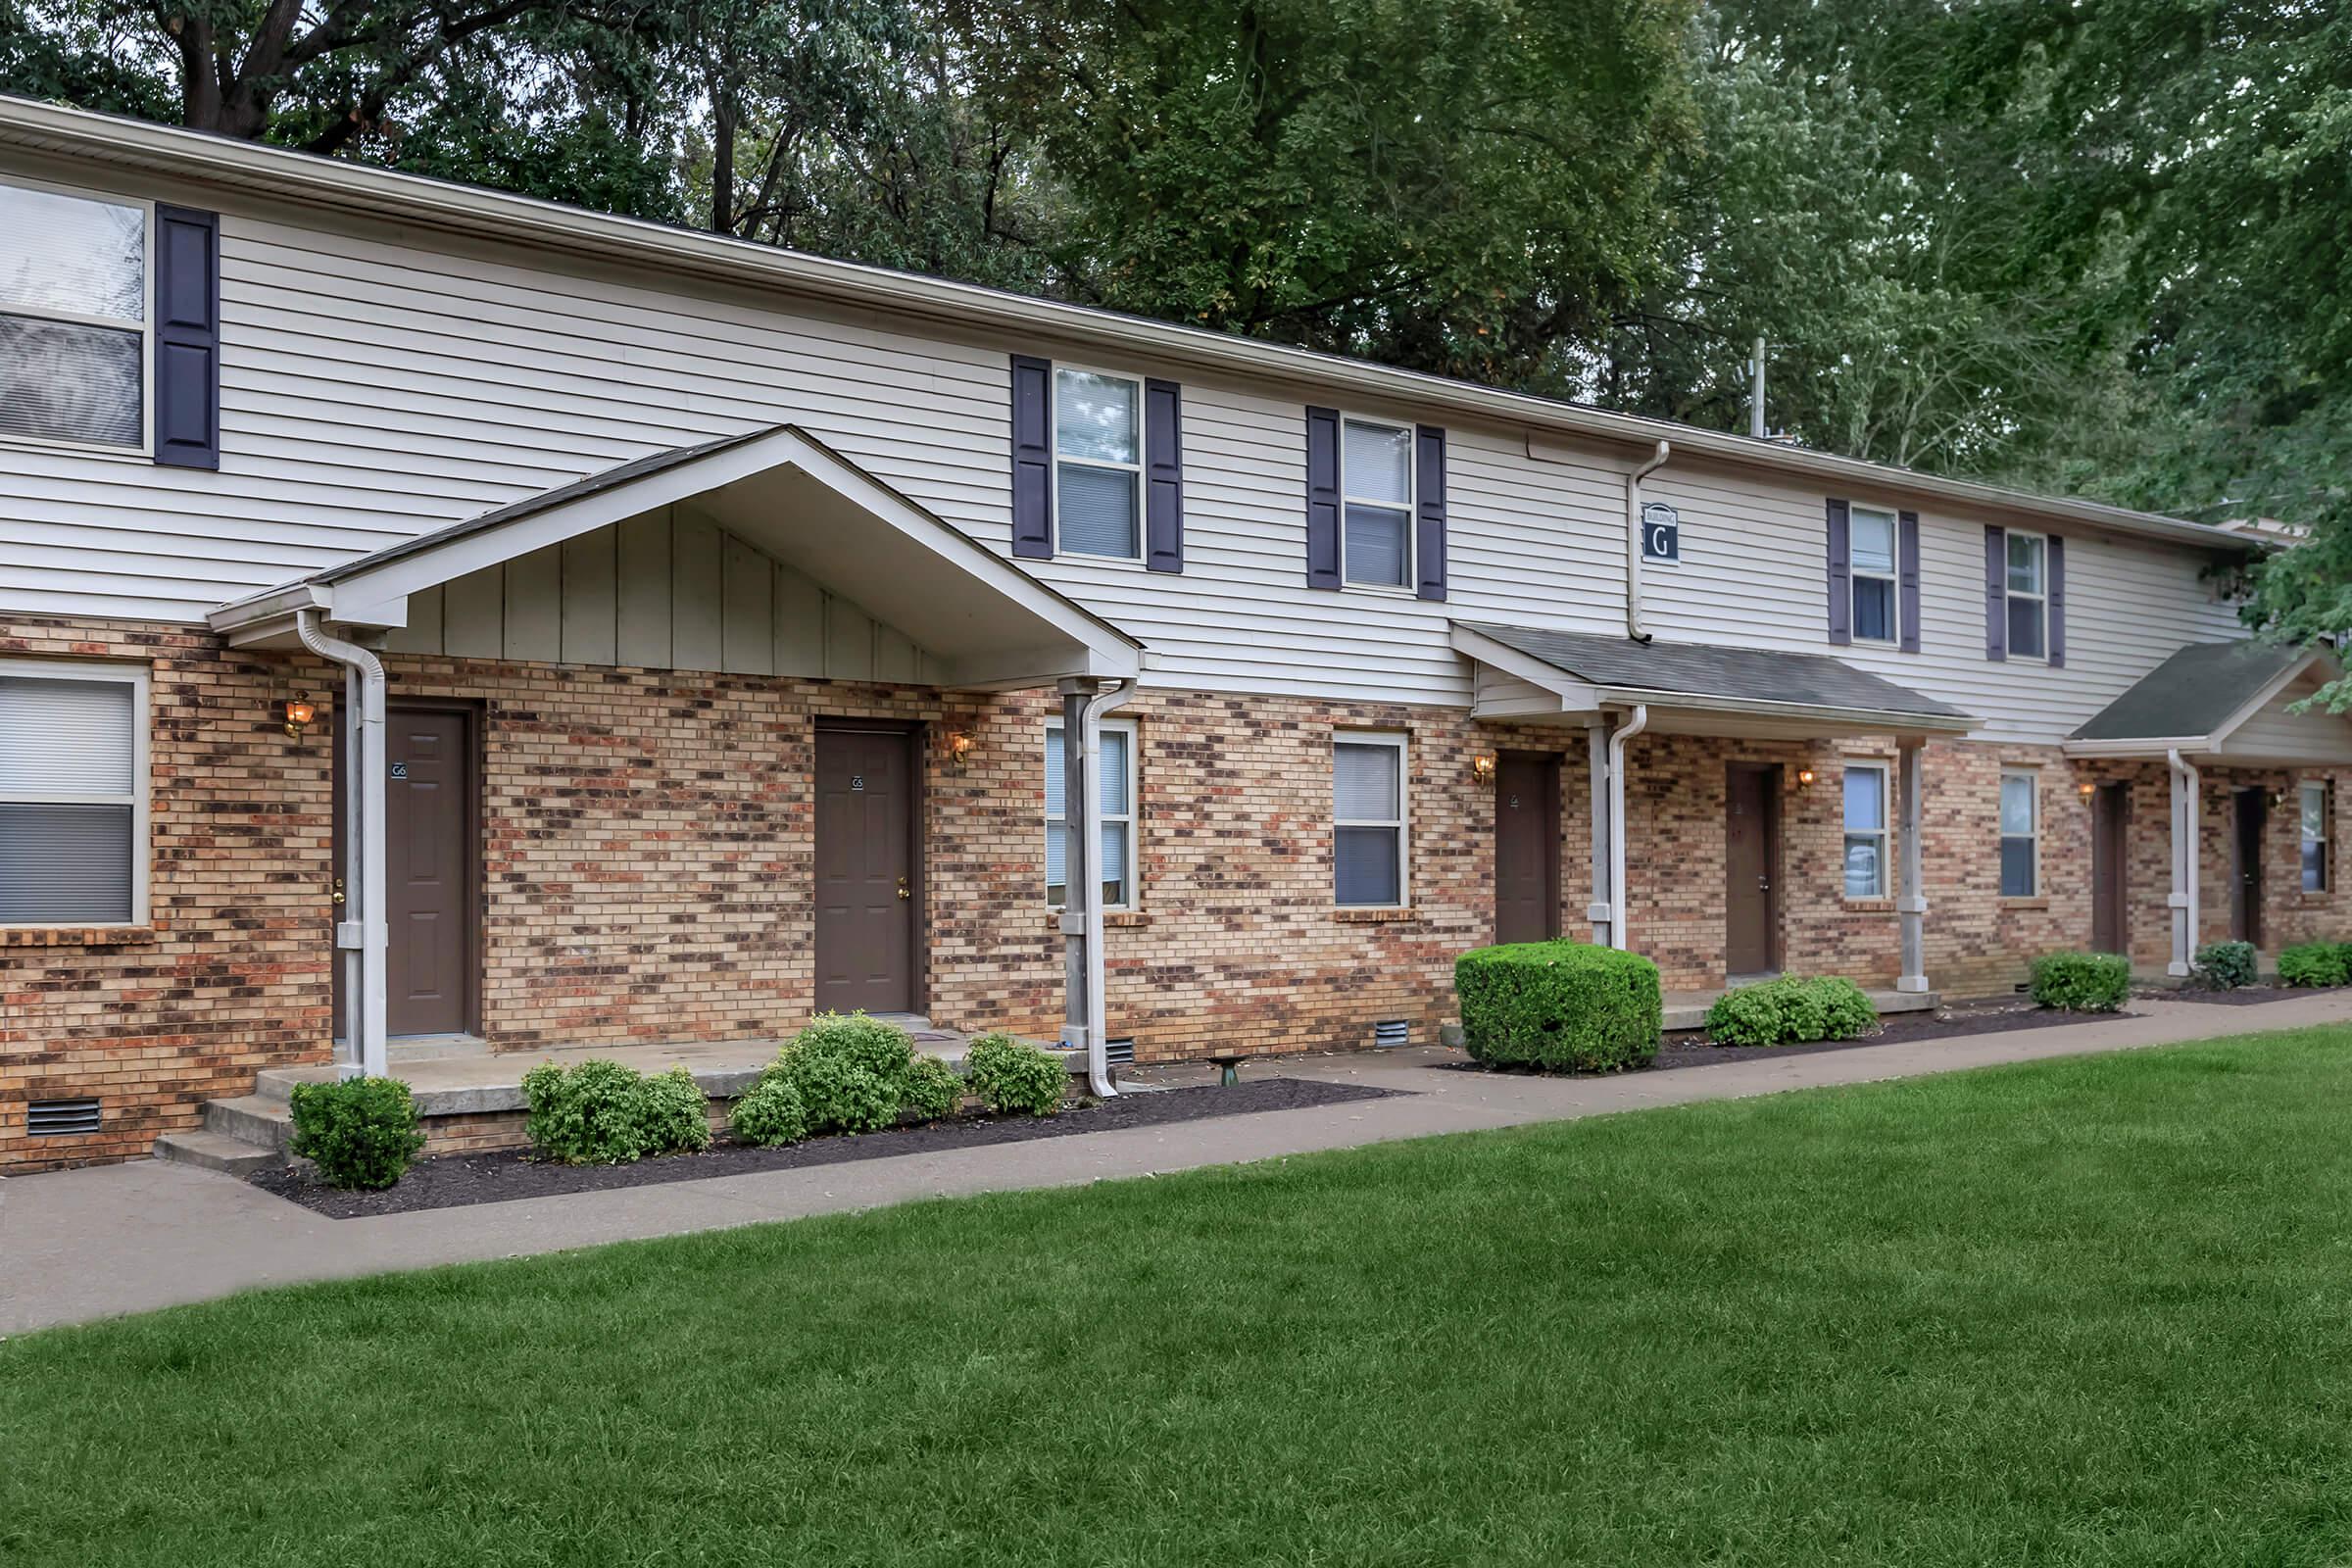 Charming community here at The Residences at 1671 Campbell in Clarksville, Tennessee